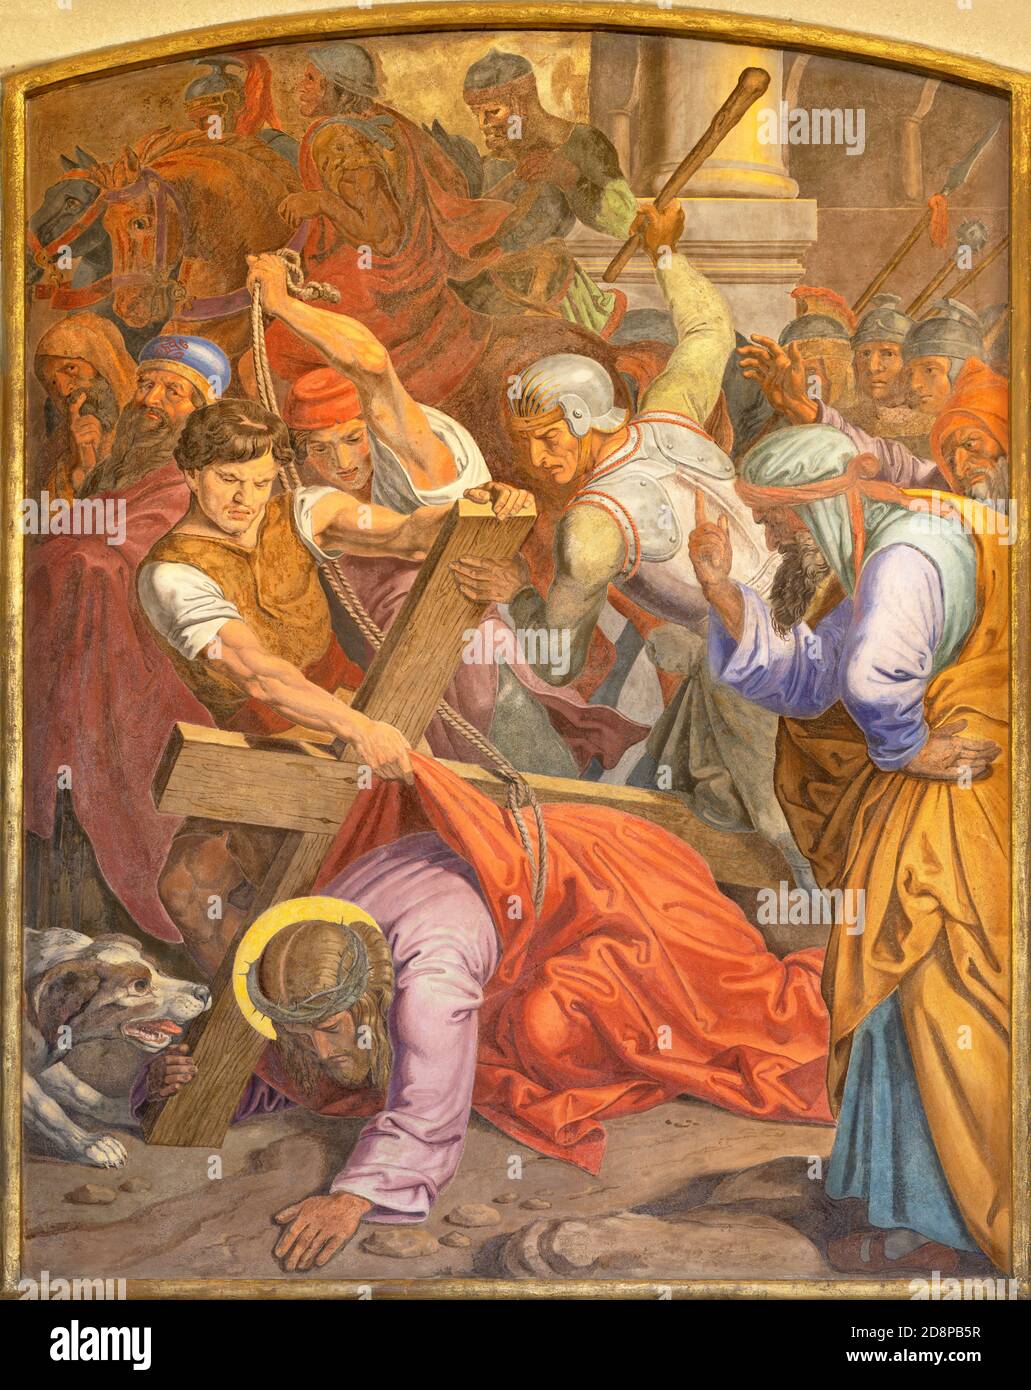 VIENNA, AUSTIRA - OCTOBER 22, 2020: The fresco Fall of Jesus undwer the cross  as part of Cross way station in the church of St. John the Nepomuk. Stock Photo